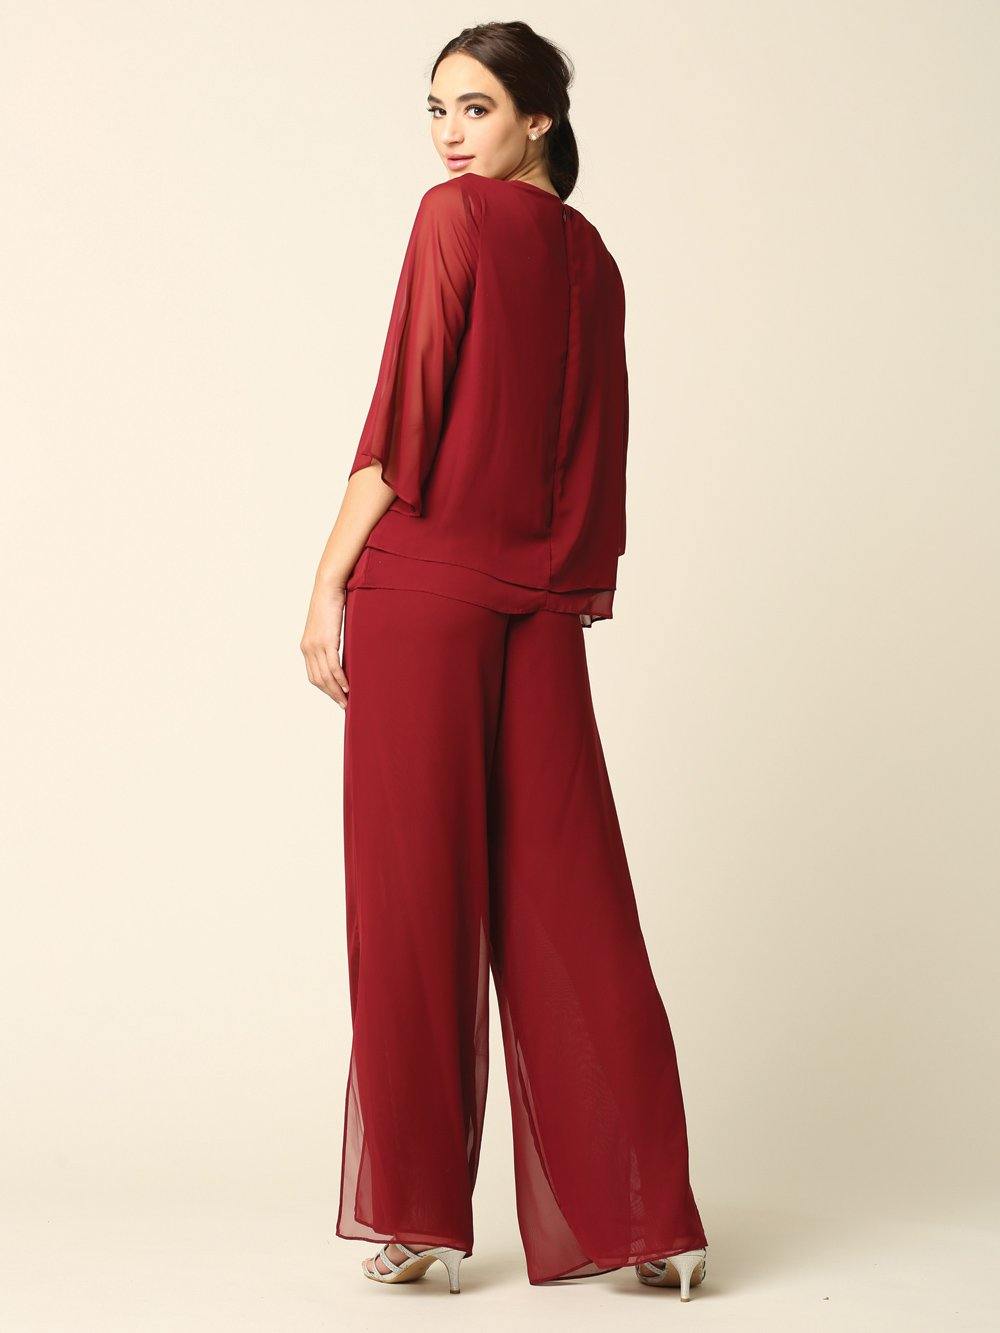 Formal Mother of the Bride Chiffon Pant Suit - The Dress Outlet Eva Fashion